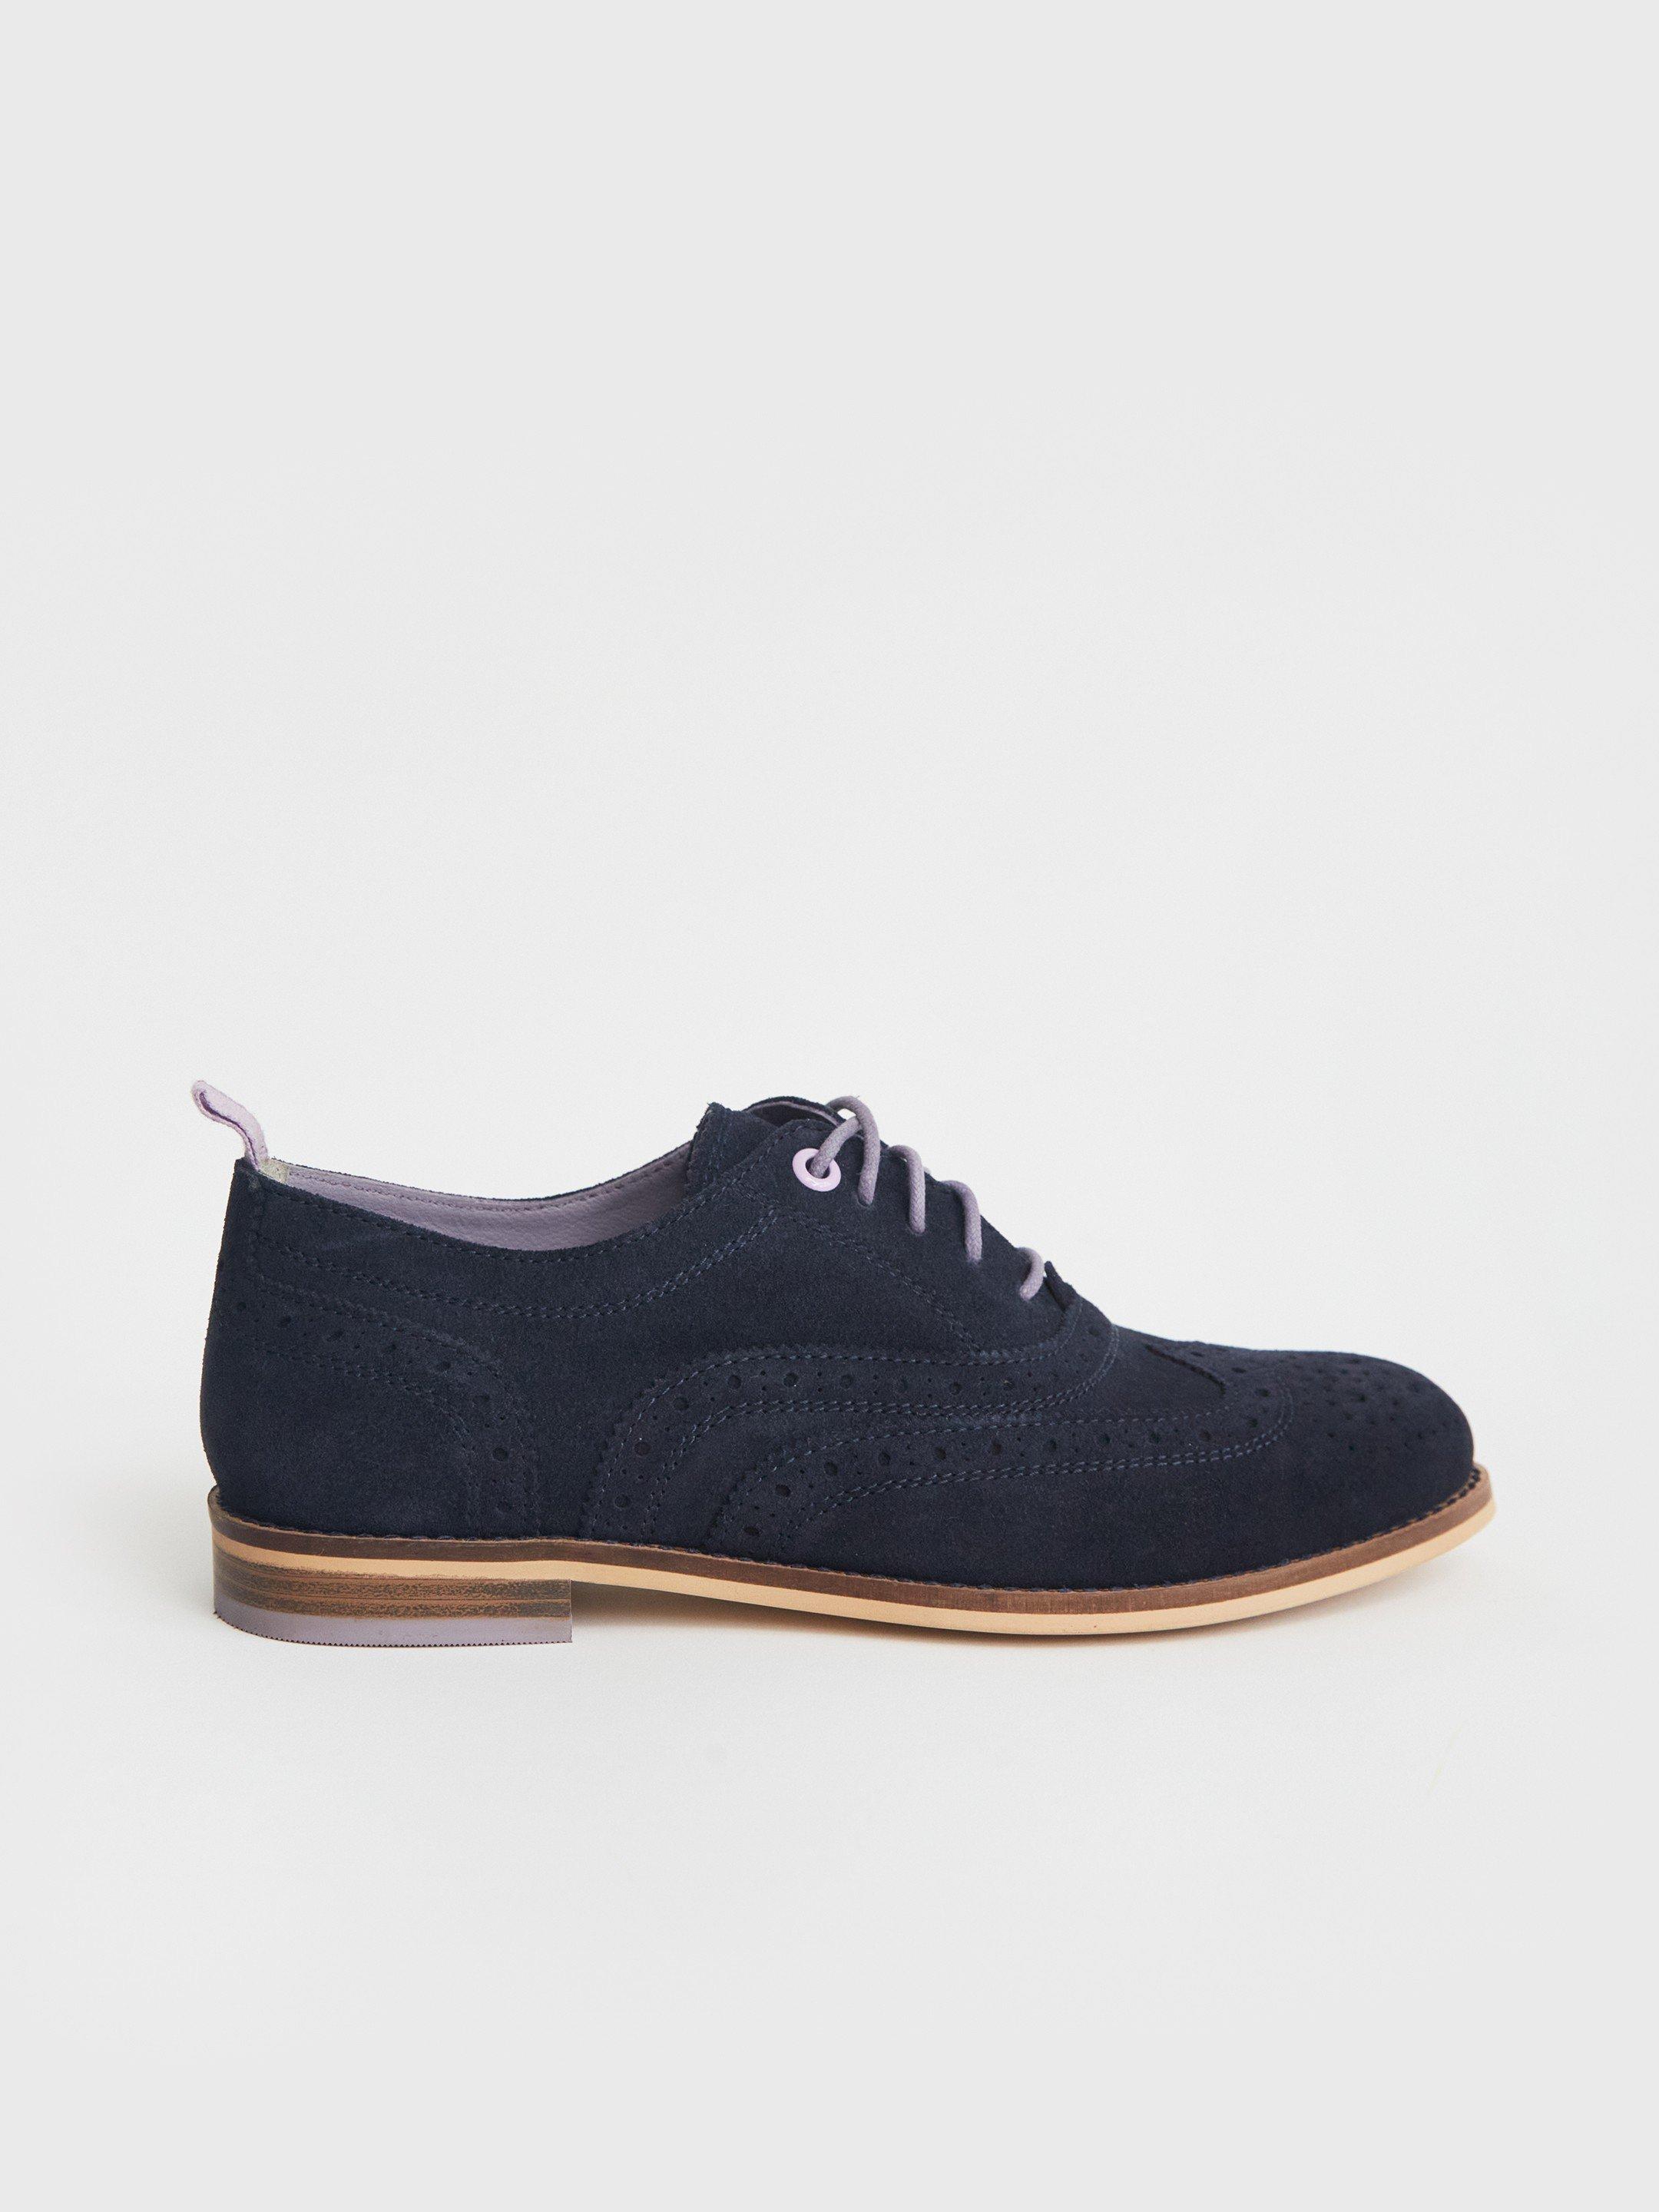 Thistle Lace Up Brogue